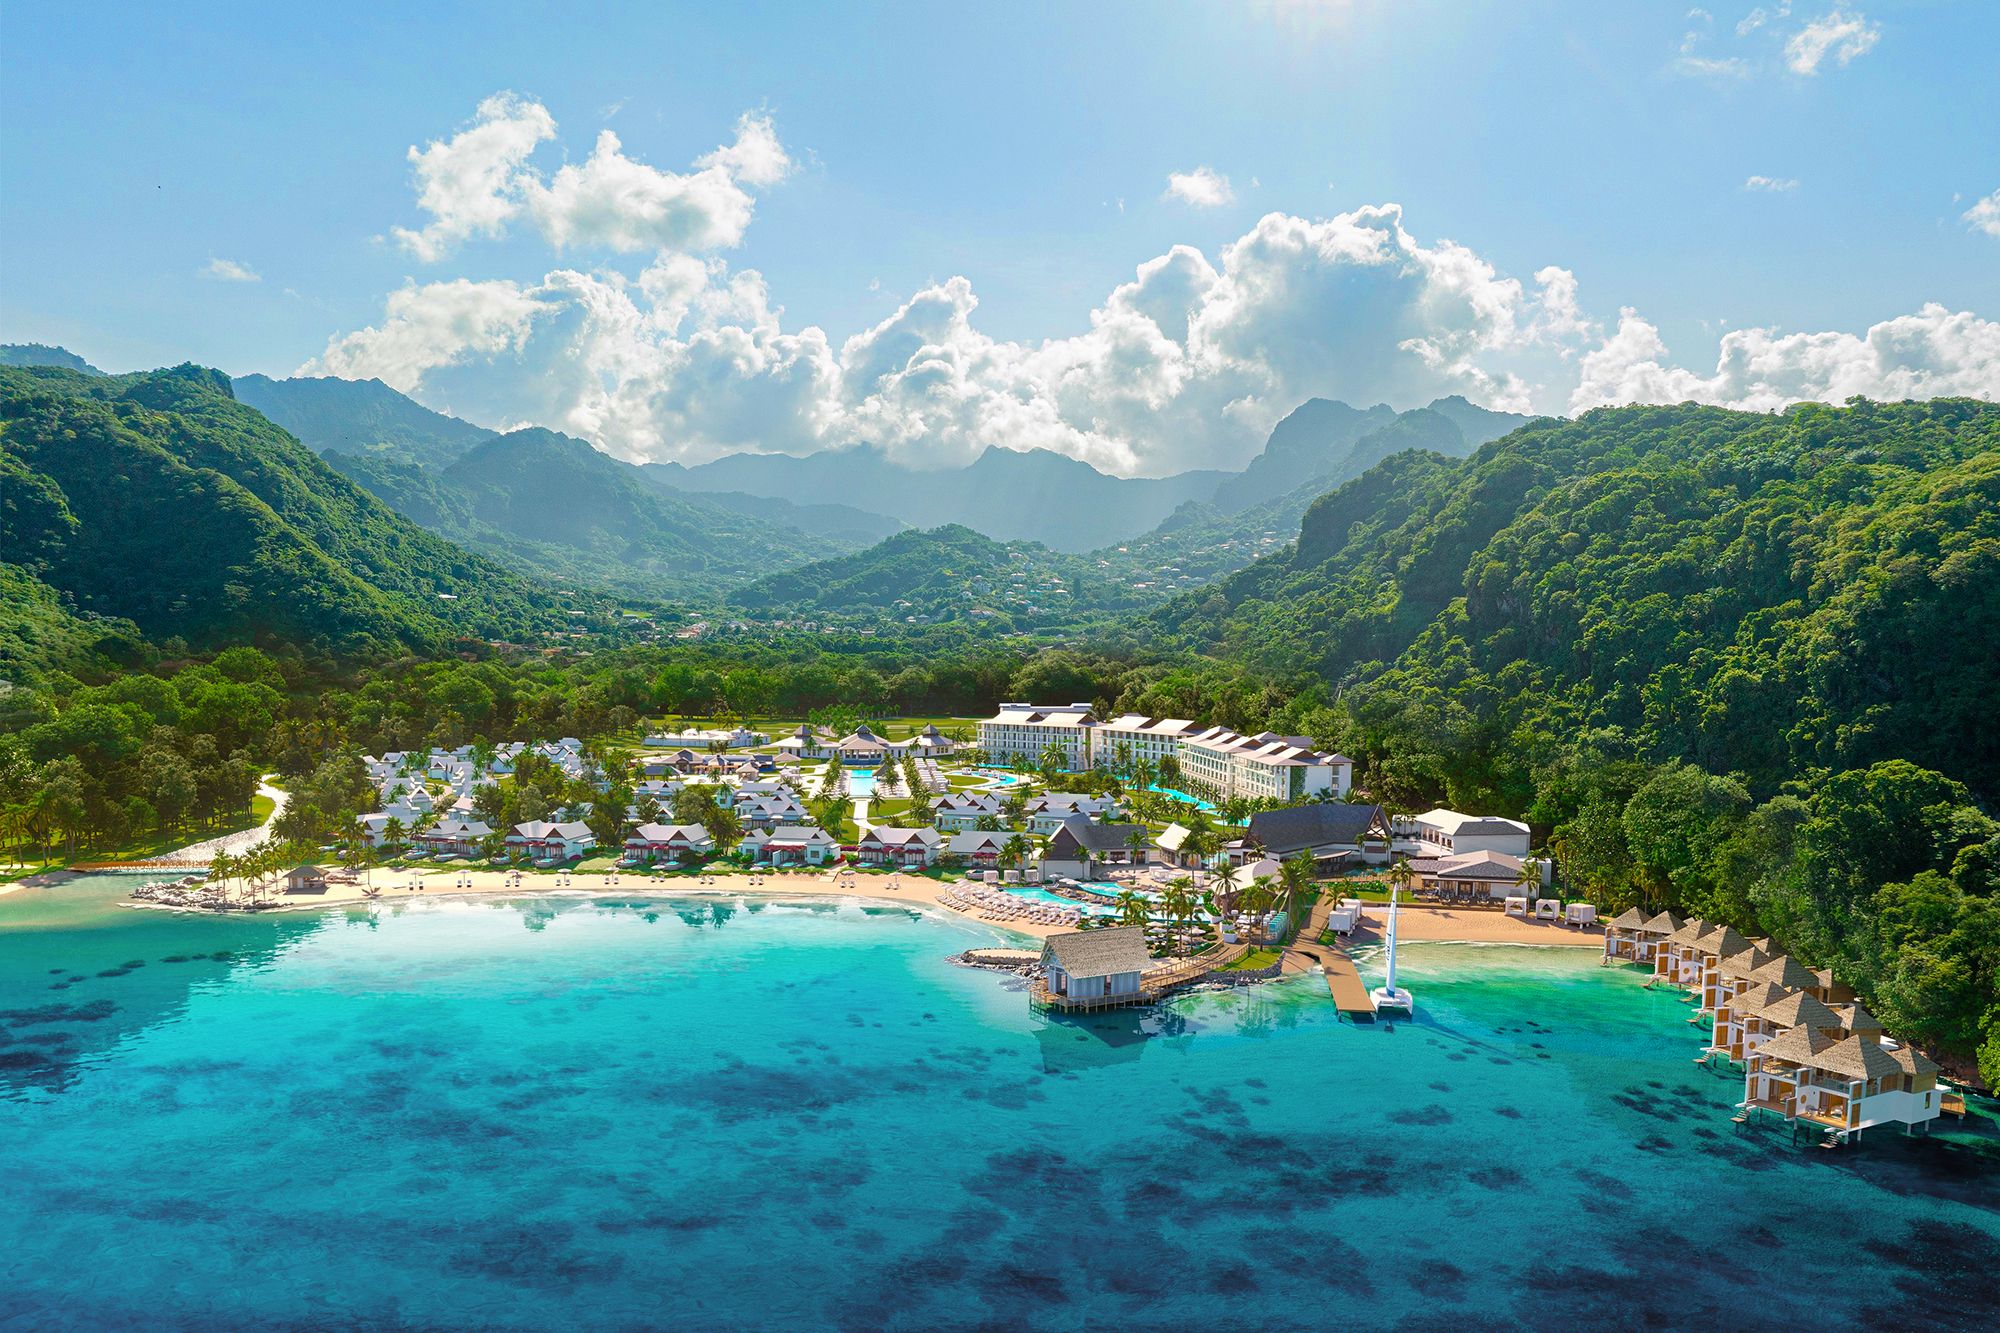 New To Sandals: 6 Experiences That Make Sandals Saint Vincent Stand Out